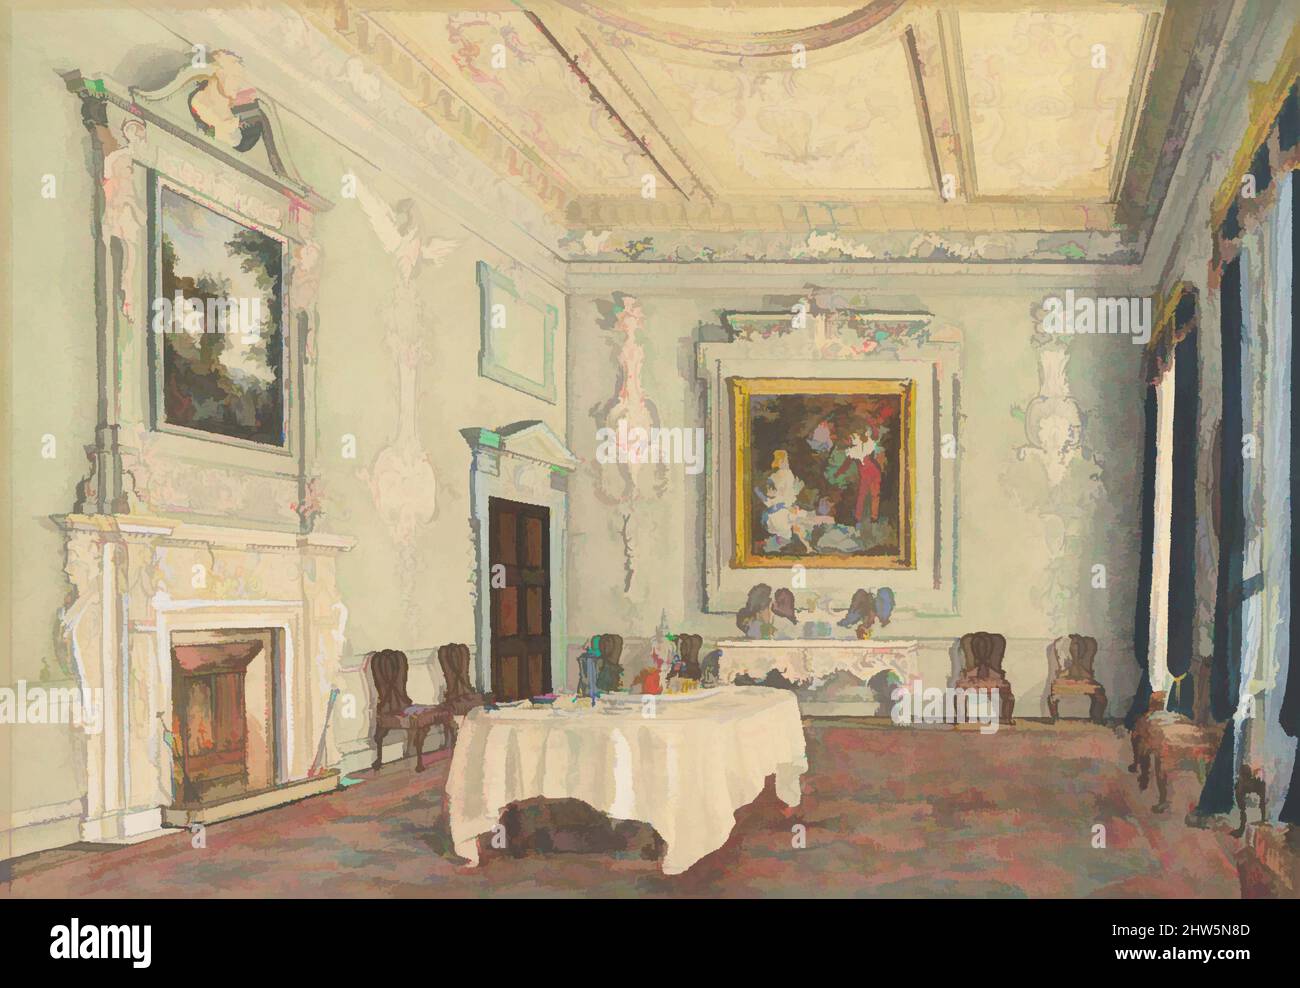 Art inspired by Kirtlington Park, Oxfordshire: View of the Dining Room, 1876, Watercolor and gouache over graphite, sheet: 13 11/16 x 19 11/16 in. (34.8 x 50 cm), Susan Alice Dashwood (British, 1856–1922), This drawing documents the history of the Kirtlington Park dining room, showing, Classic works modernized by Artotop with a splash of modernity. Shapes, color and value, eye-catching visual impact on art. Emotions through freedom of artworks in a contemporary way. A timeless message pursuing a wildly creative new direction. Artists turning to the digital medium and creating the Artotop NFT Stock Photo